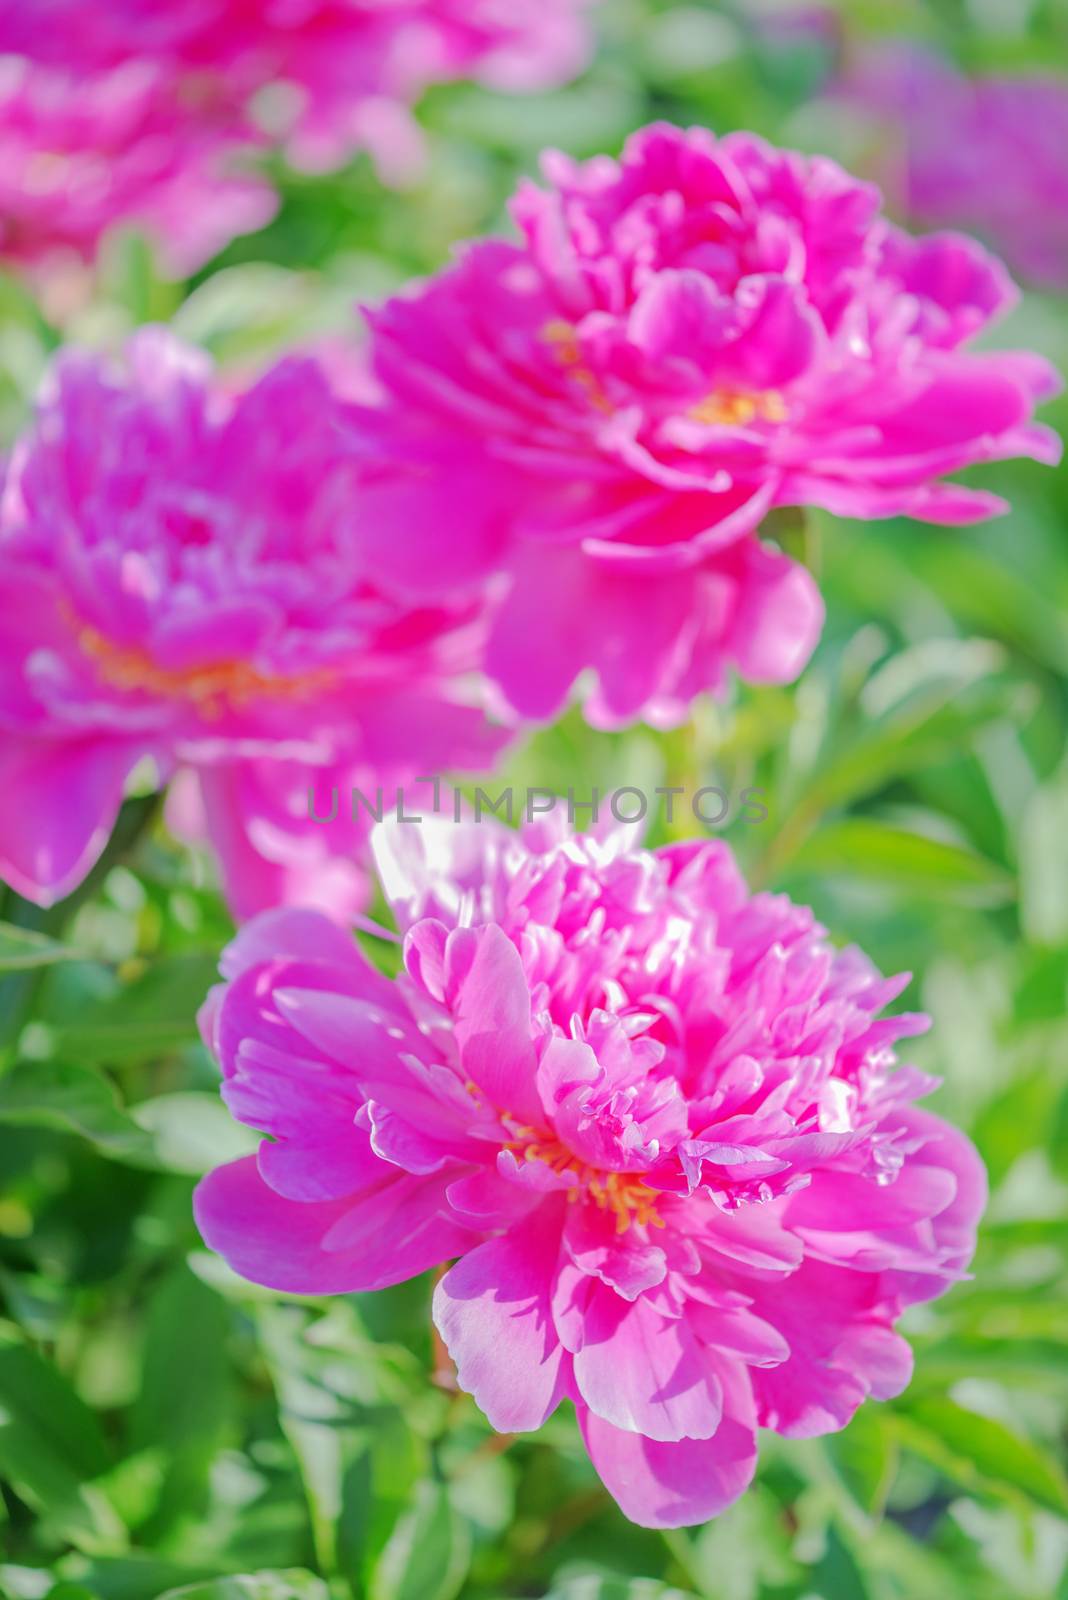 Several beautiful pink peonies on the flowerbed outdoors